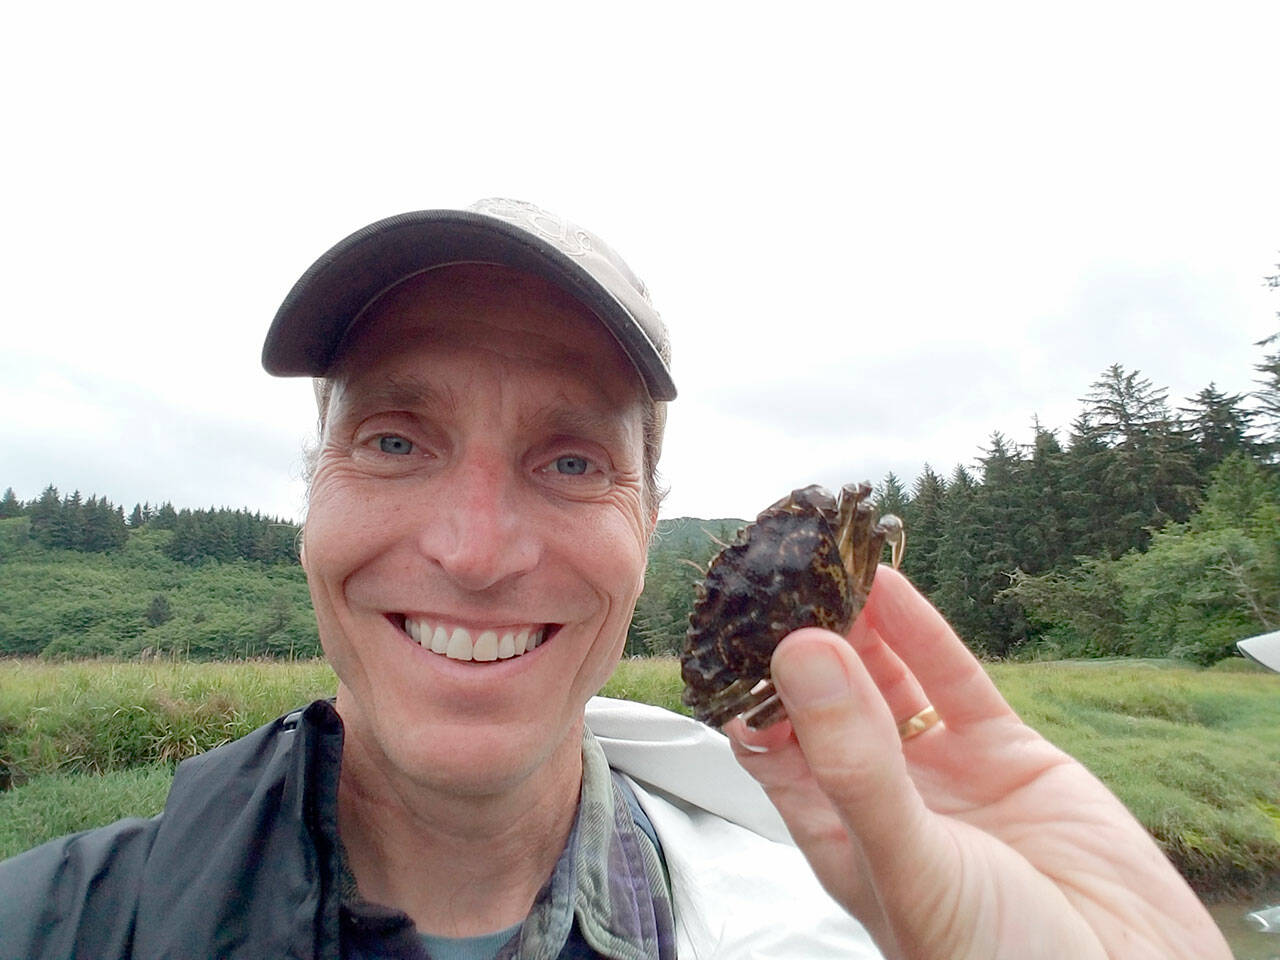 Neil Harrington will present “Voracious Invaders: Green Crabs in our Salish Sea” at 7 p.m. Wednesday.